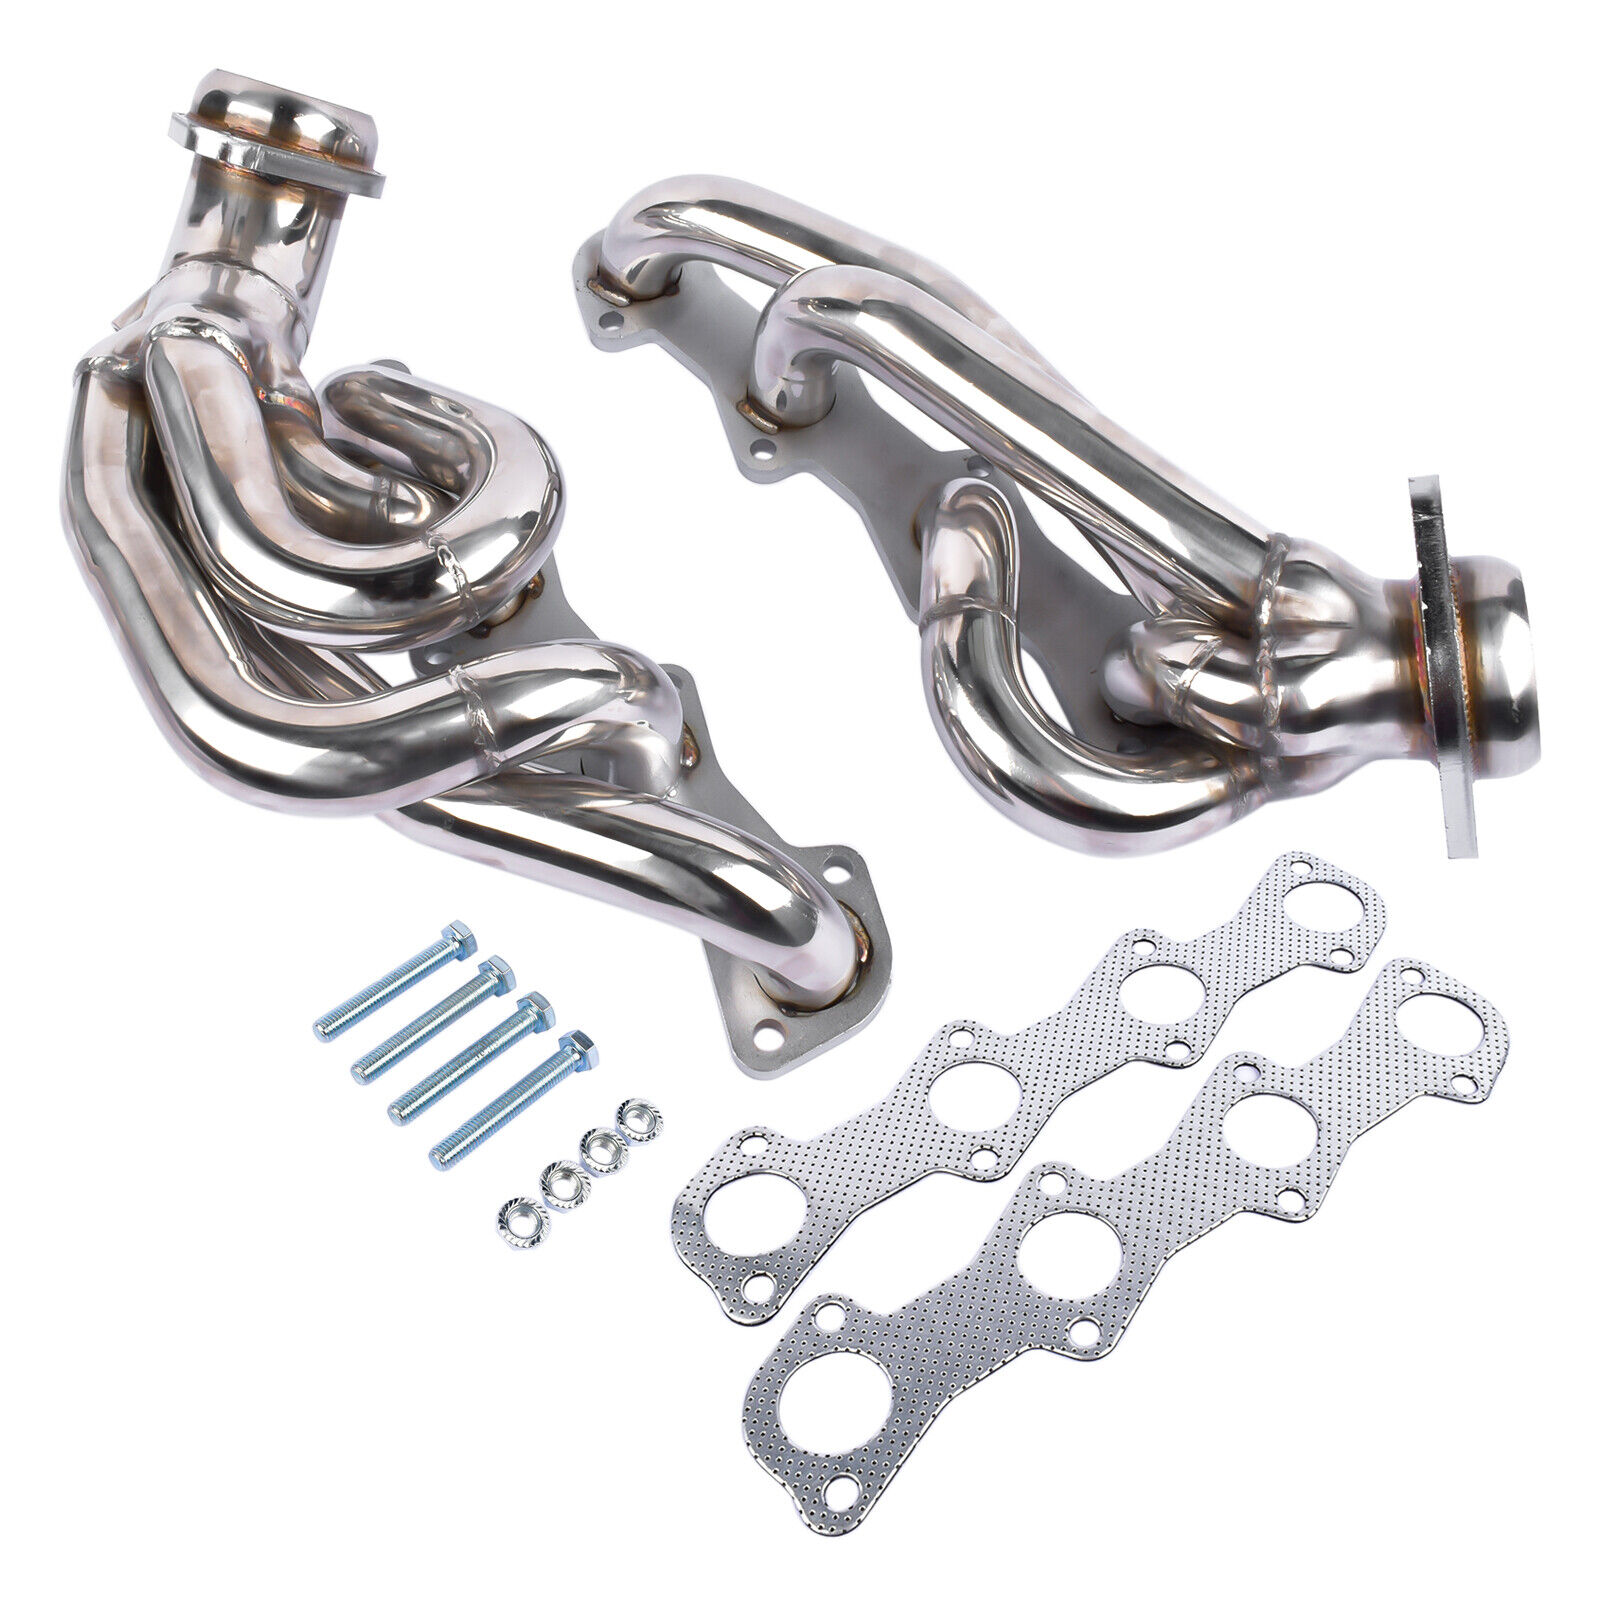 For Ford F150 F250 Expedition Shorty Headers Manifold 1997-2003 5.4L V8 Polished